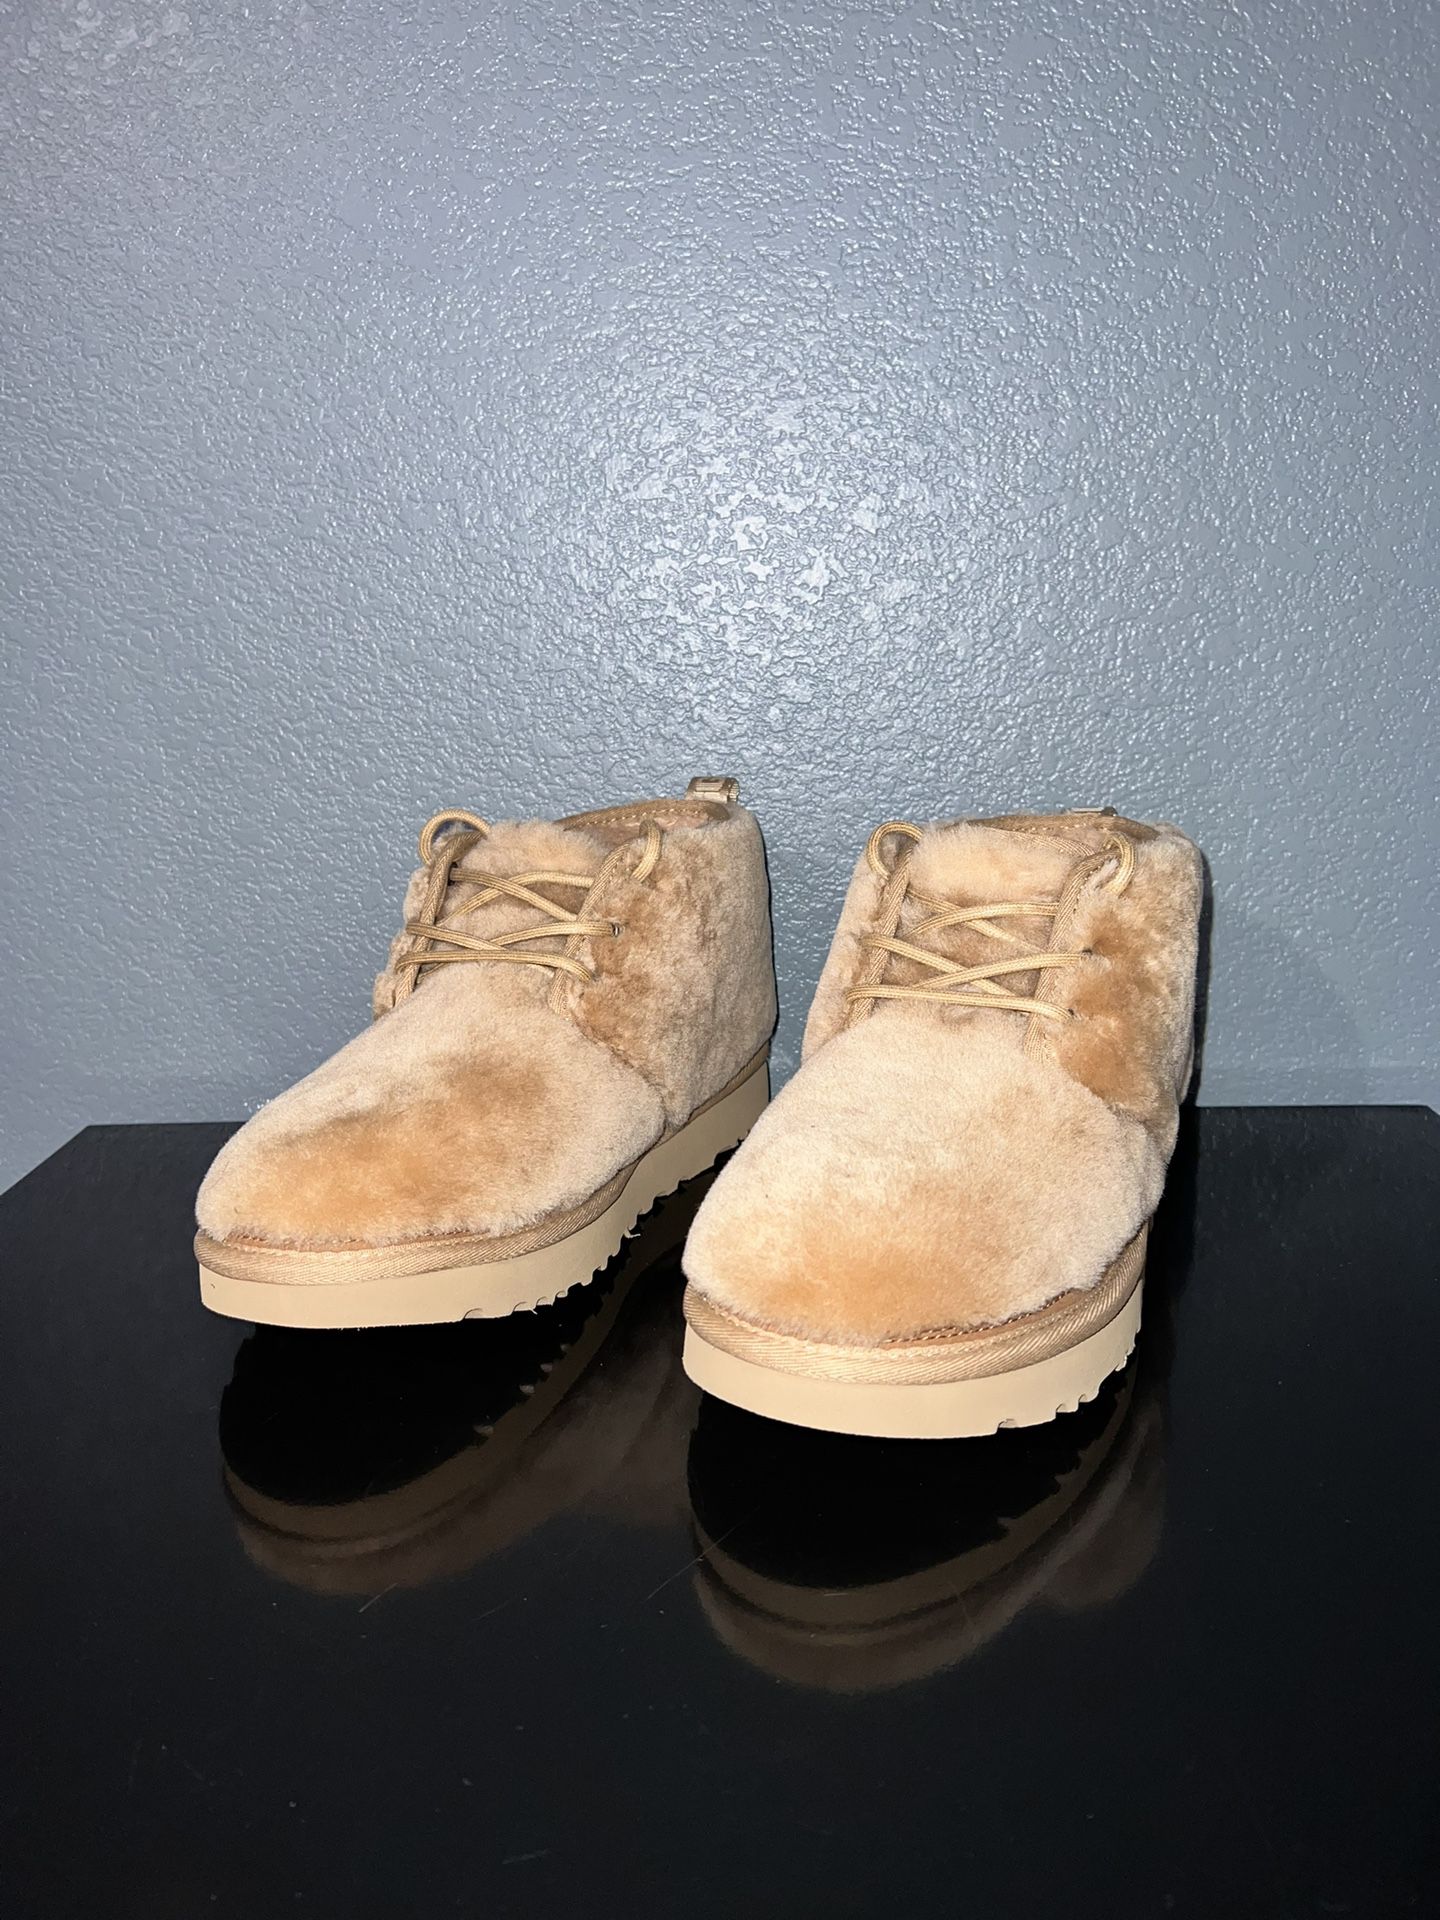 Mens Uggs Neumel Cozy Sheepskin Ankle Boots Size 8 